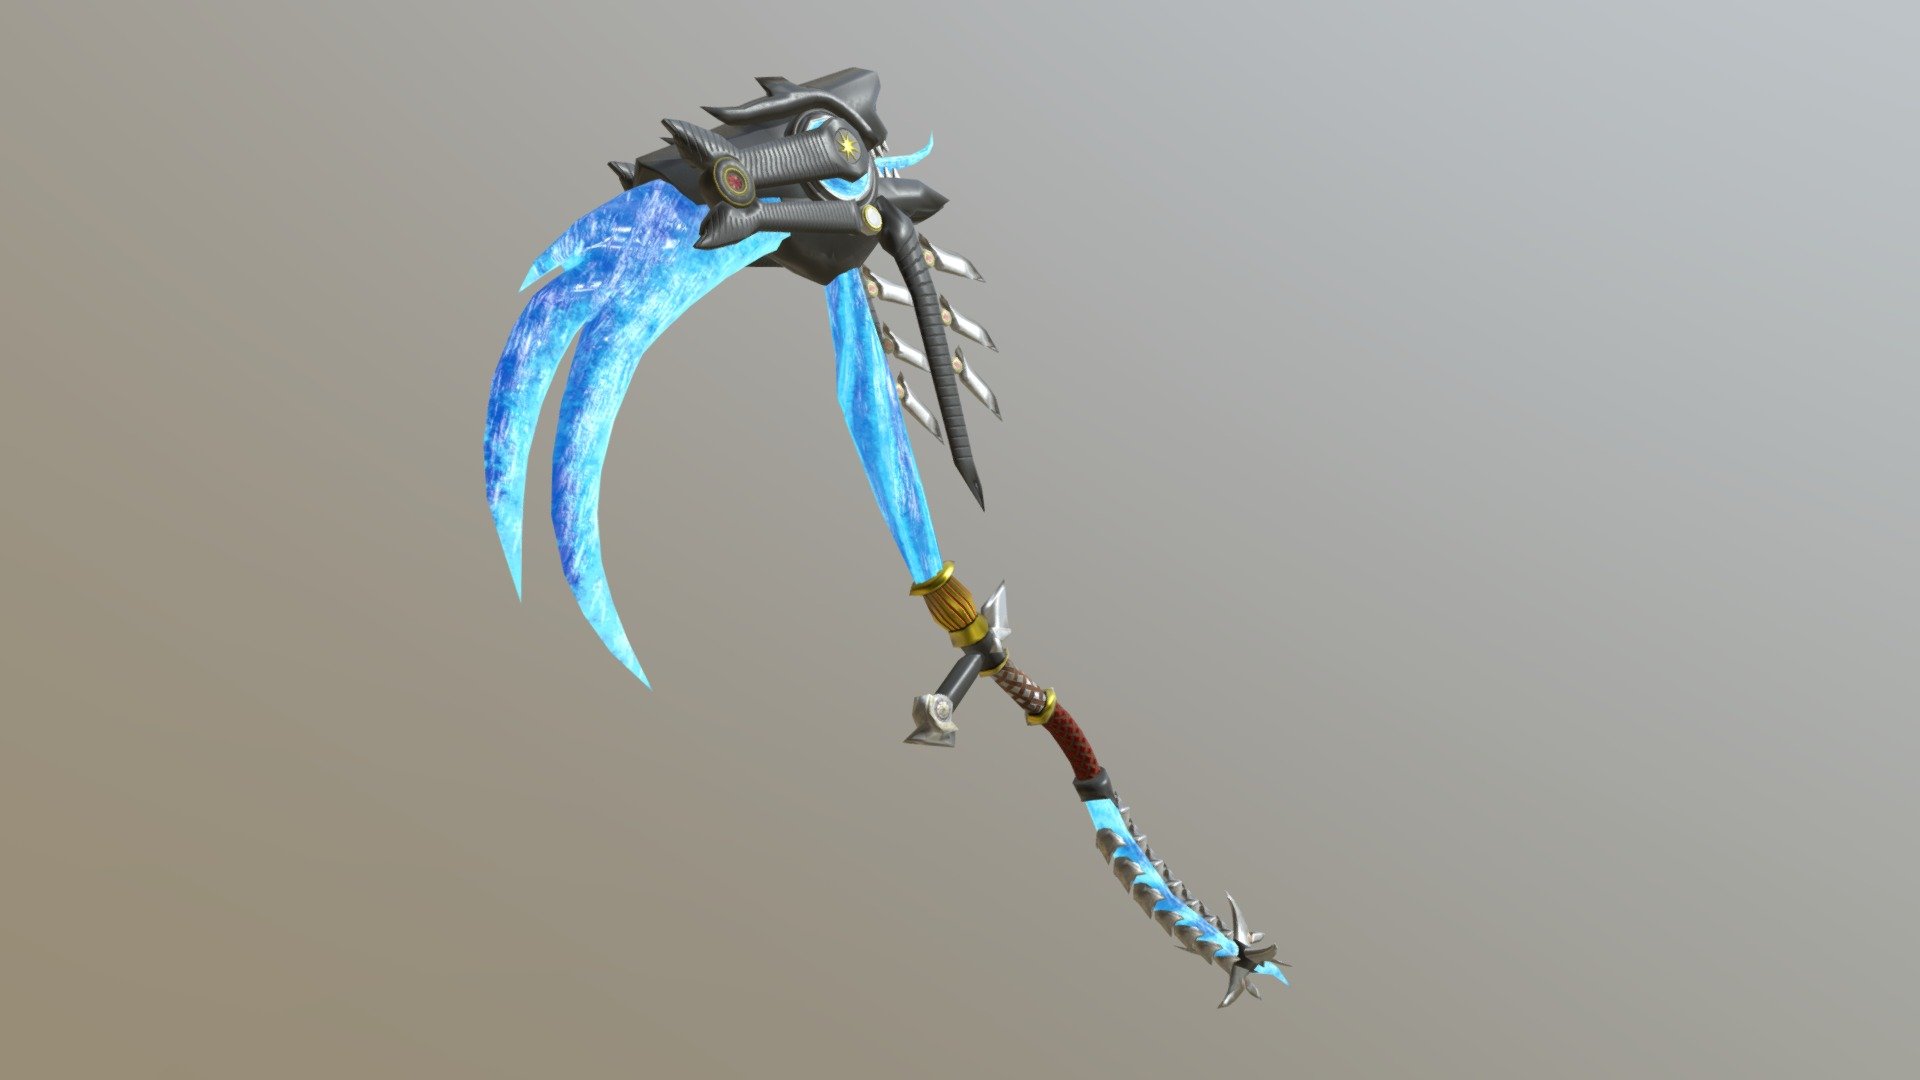 This Demonic Glacier Scythe.

lowpoly: 6926 Tris.

Texture Maps in 2k and 4k included.

The scythe has a PBR Metal workflow. 6 texture maps.: ( 4k and 2k versions)
- Base Color
- Roughness
- Metallic
- Normal
- Height
- Emissive

Please leave a Like or a Comment if you like the model. In that way you would help me alot.

pm me if you need more information about the model

Thank you!

**this model is based on My.Com Games Scythe
https://sketchfab.com/3d-models/legendary-necromancer-weapon-2232bf8e23134b0b8d1eb9b23886eccc?ref=related - Legendary Scythe - 3D model by Joel (@JoelKilb) 3d model